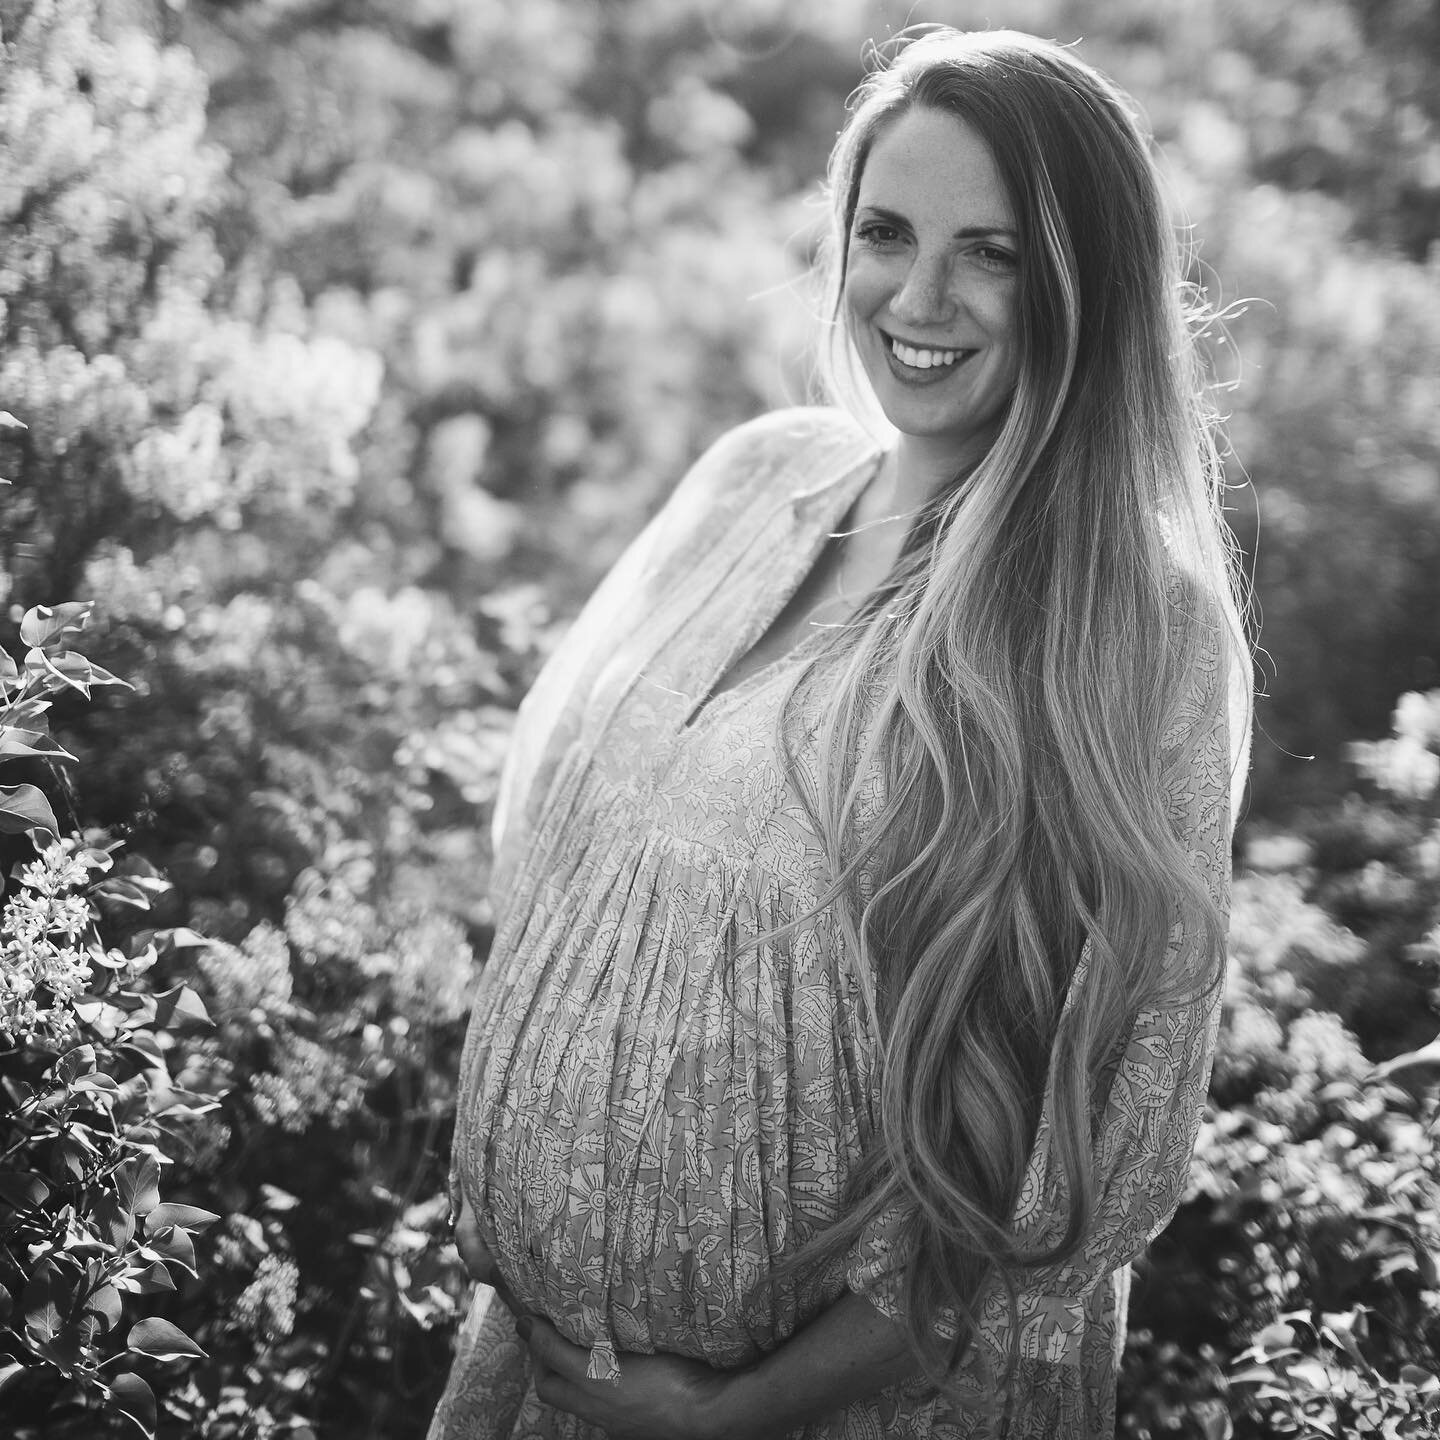 My Holistic Pregnancy🌺

Here is a list of some modalities and practices I used throughout my holistic pregnancy: 

My prenatal and postpartum team:
🔸Midwives - @communitymidwivesofkingston
🔸Naturopathic Doctor - @drandreahilbornnd
🔸Pelvic Floor P